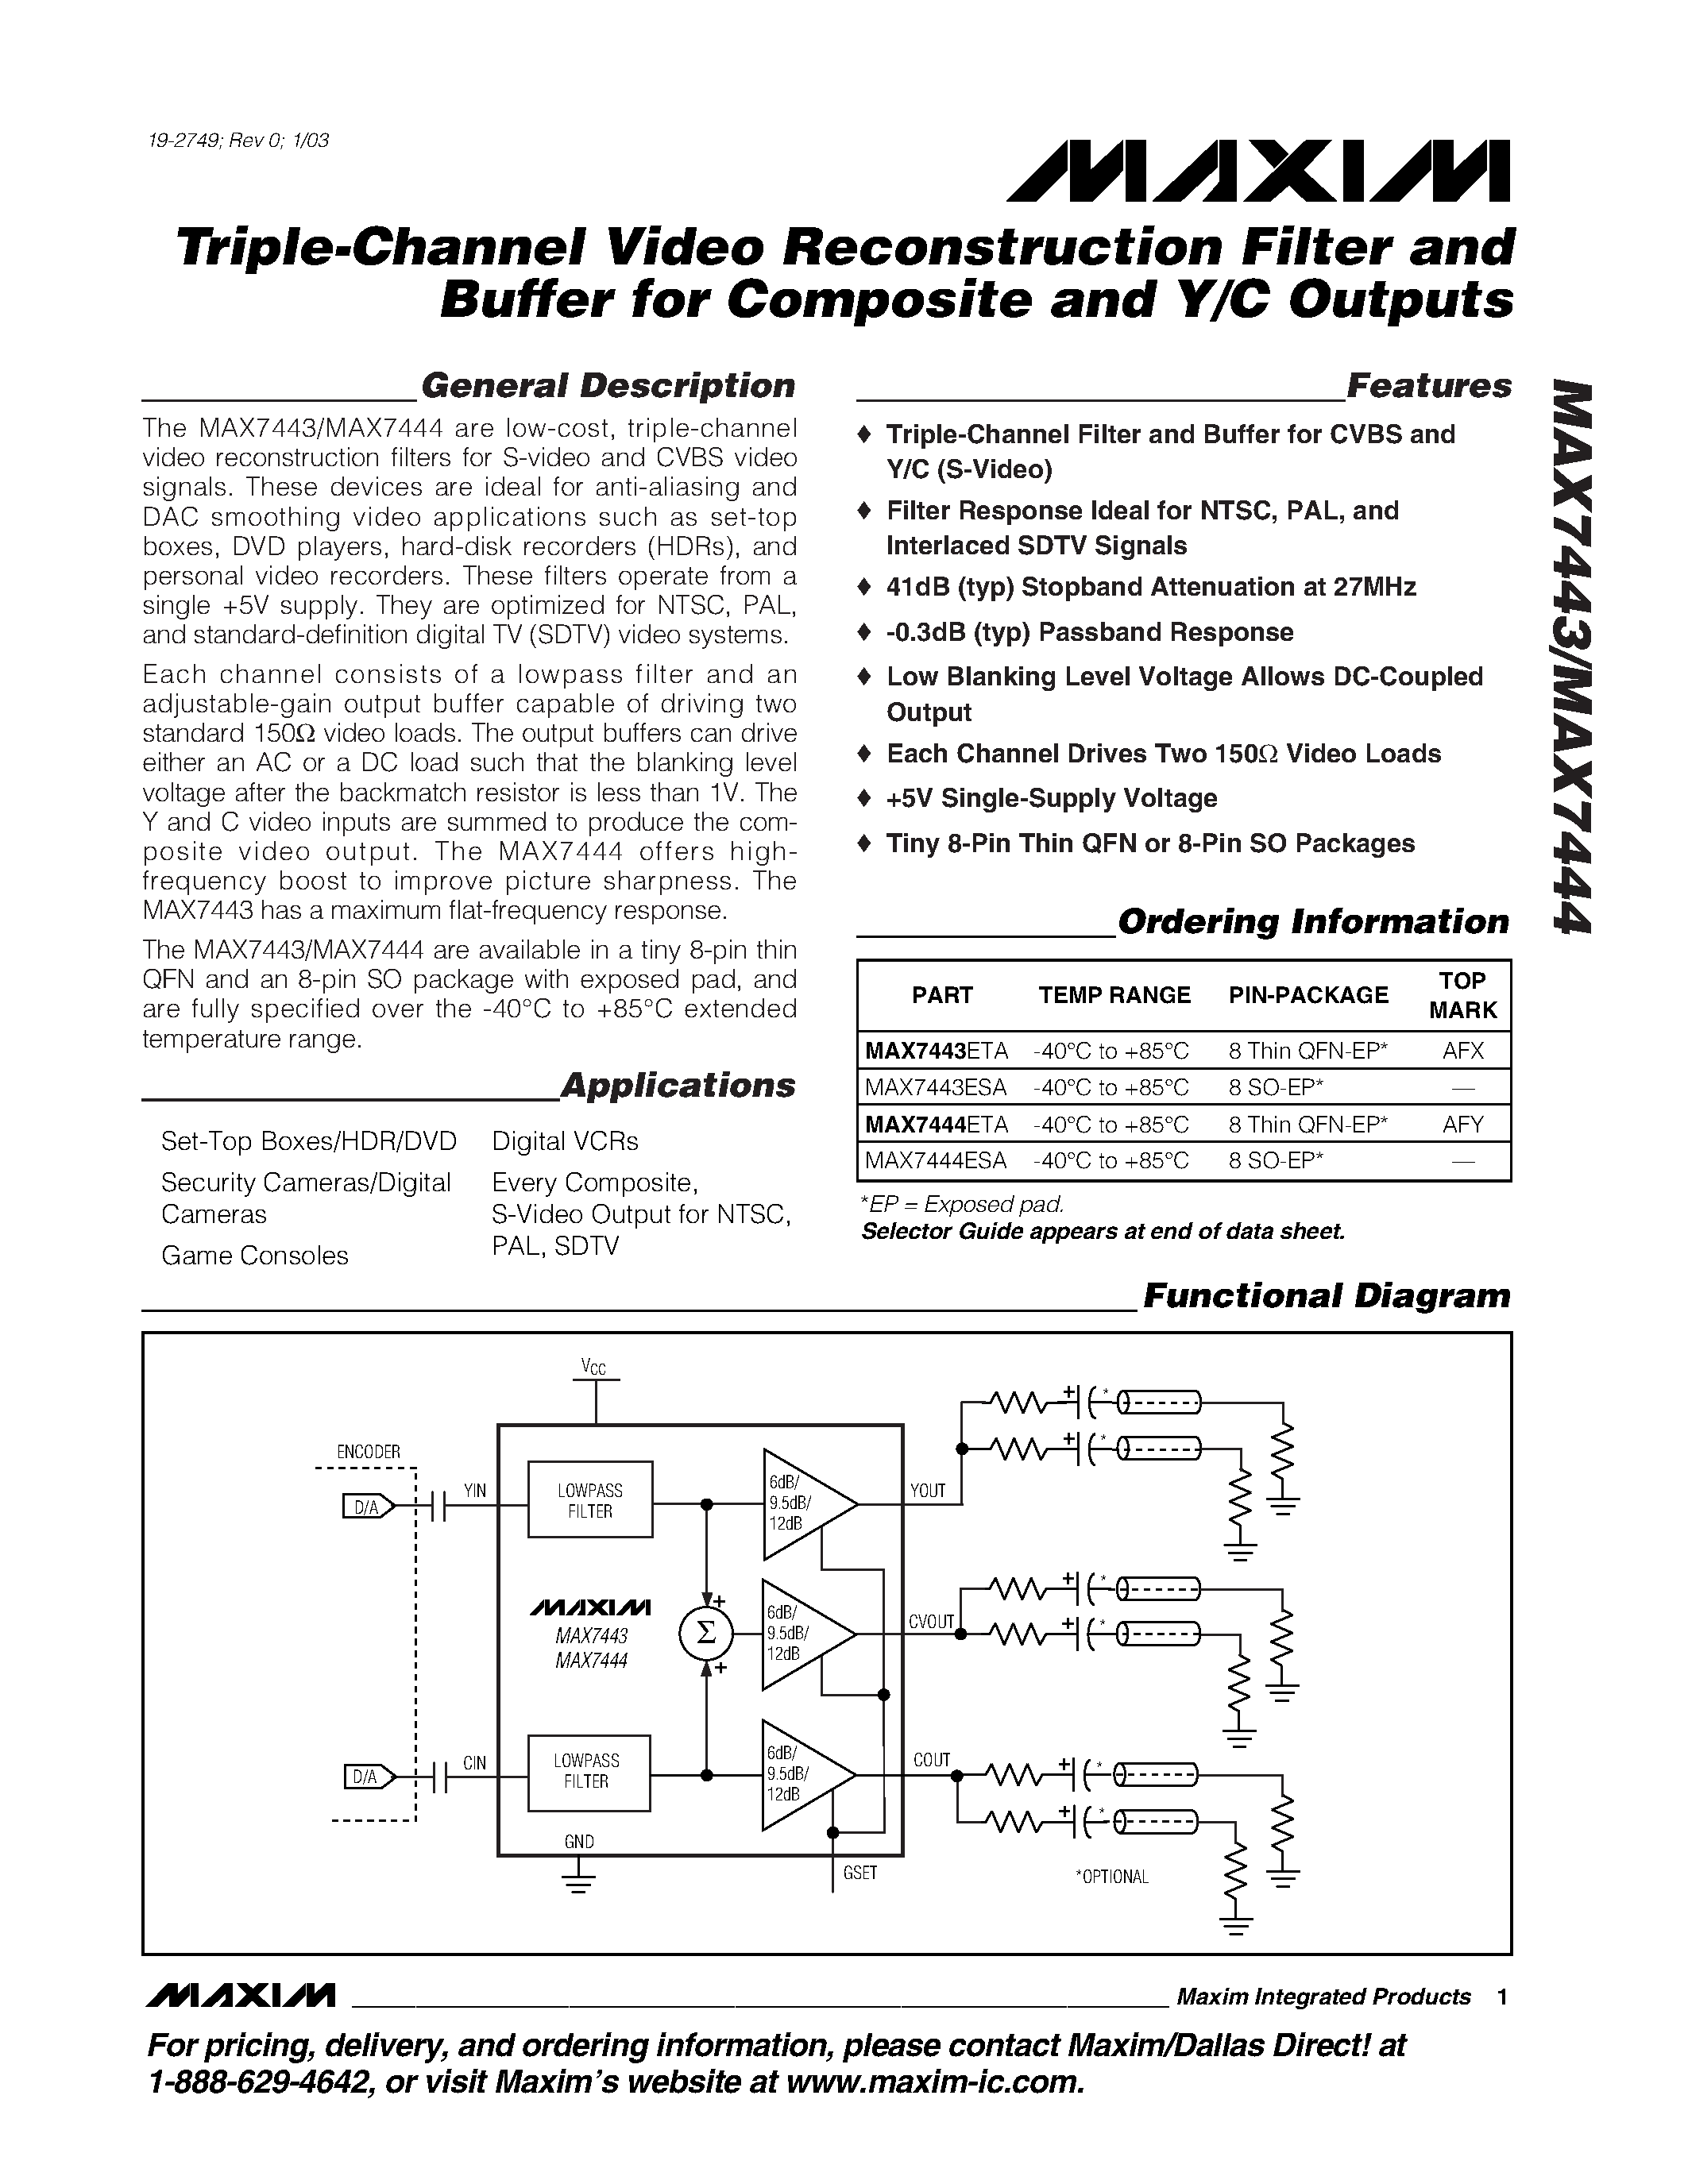 Datasheet MAX7444ETA - Triple-Channel Video Reconstruction Filter and Buffer for Composite and Y/C Outputs page 1